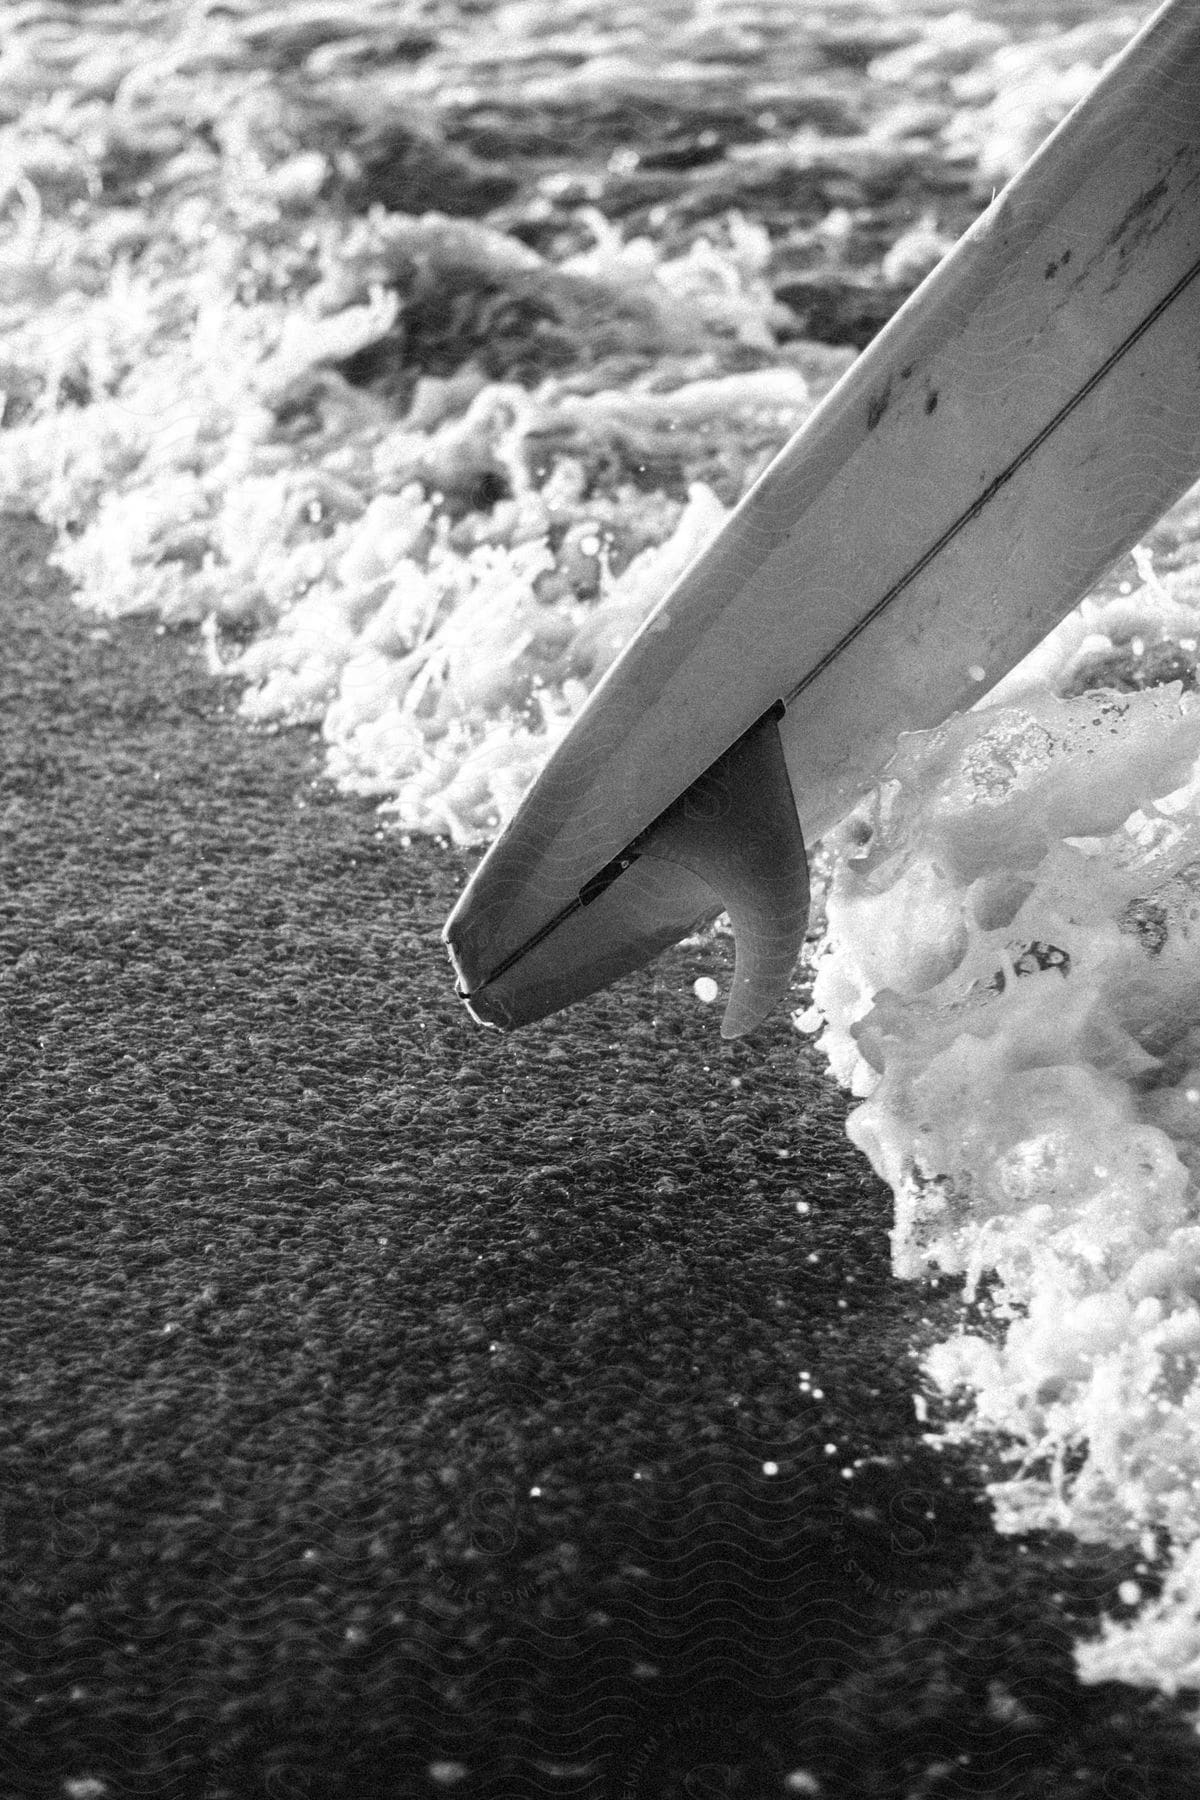 Black and white image a surfboard at the beach